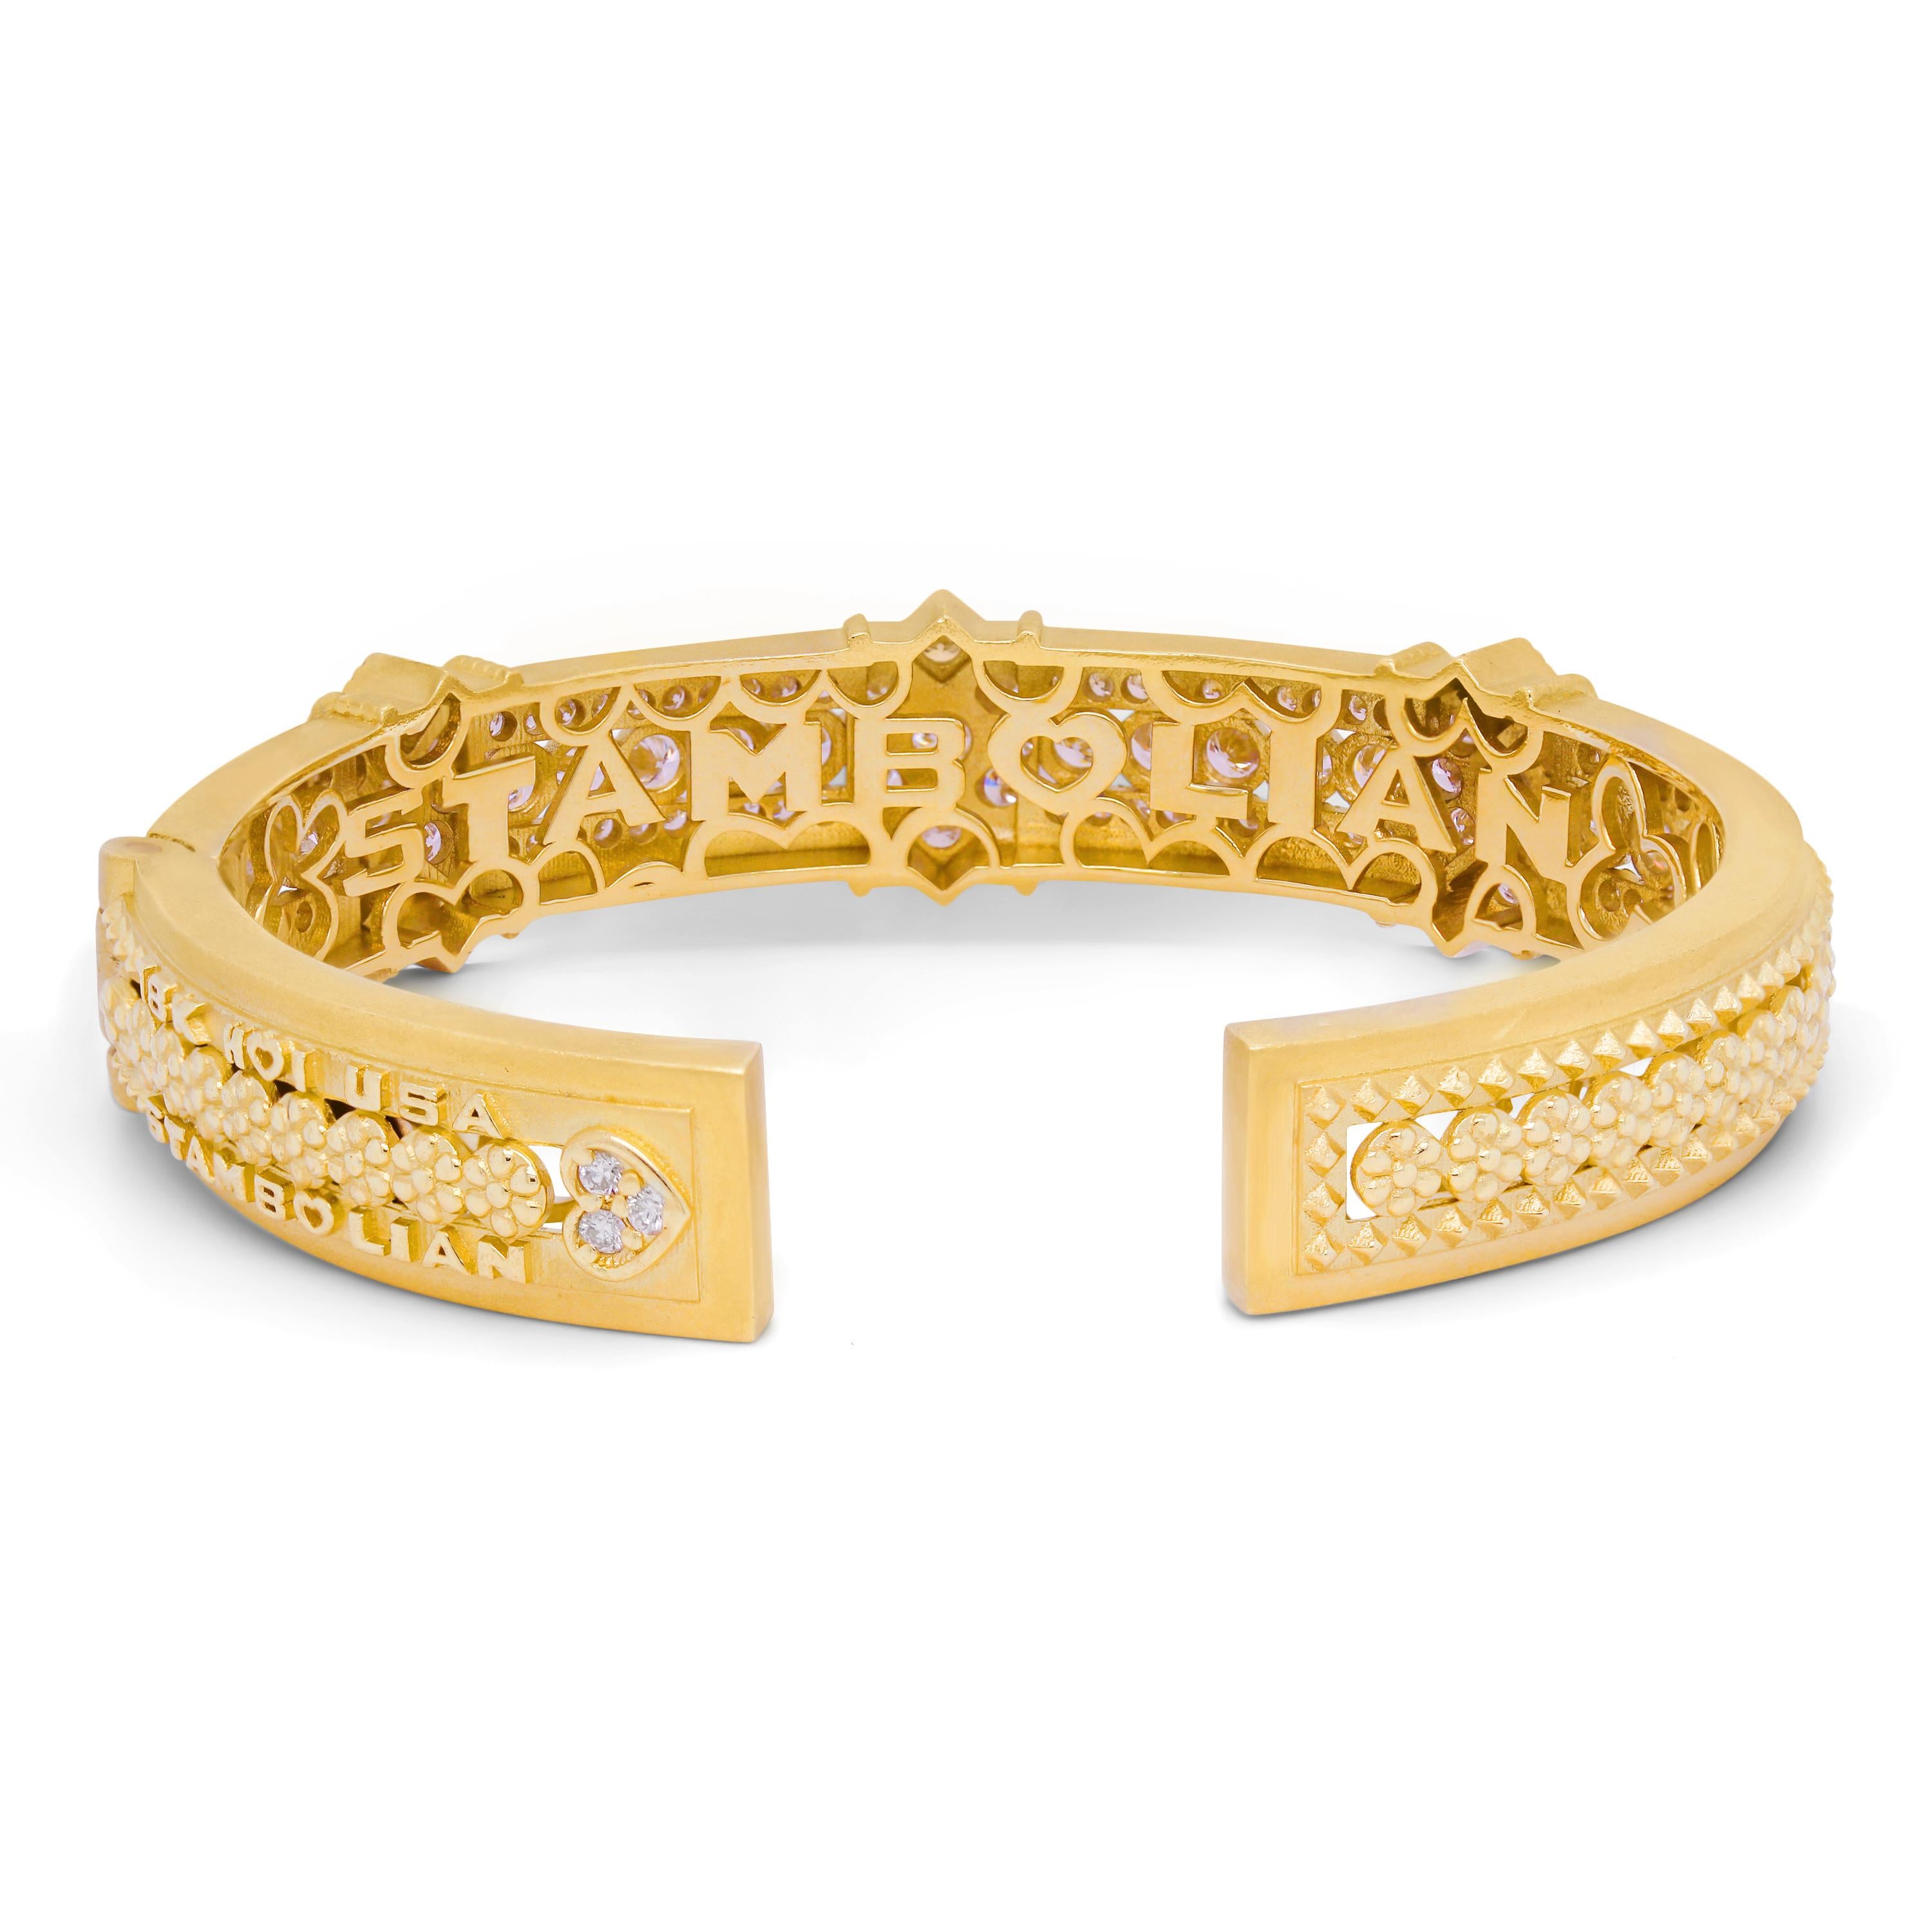 Stambolian 18K Yellow Gold and Diamond Bangle Bracelet In New Condition For Sale In Boca Raton, FL